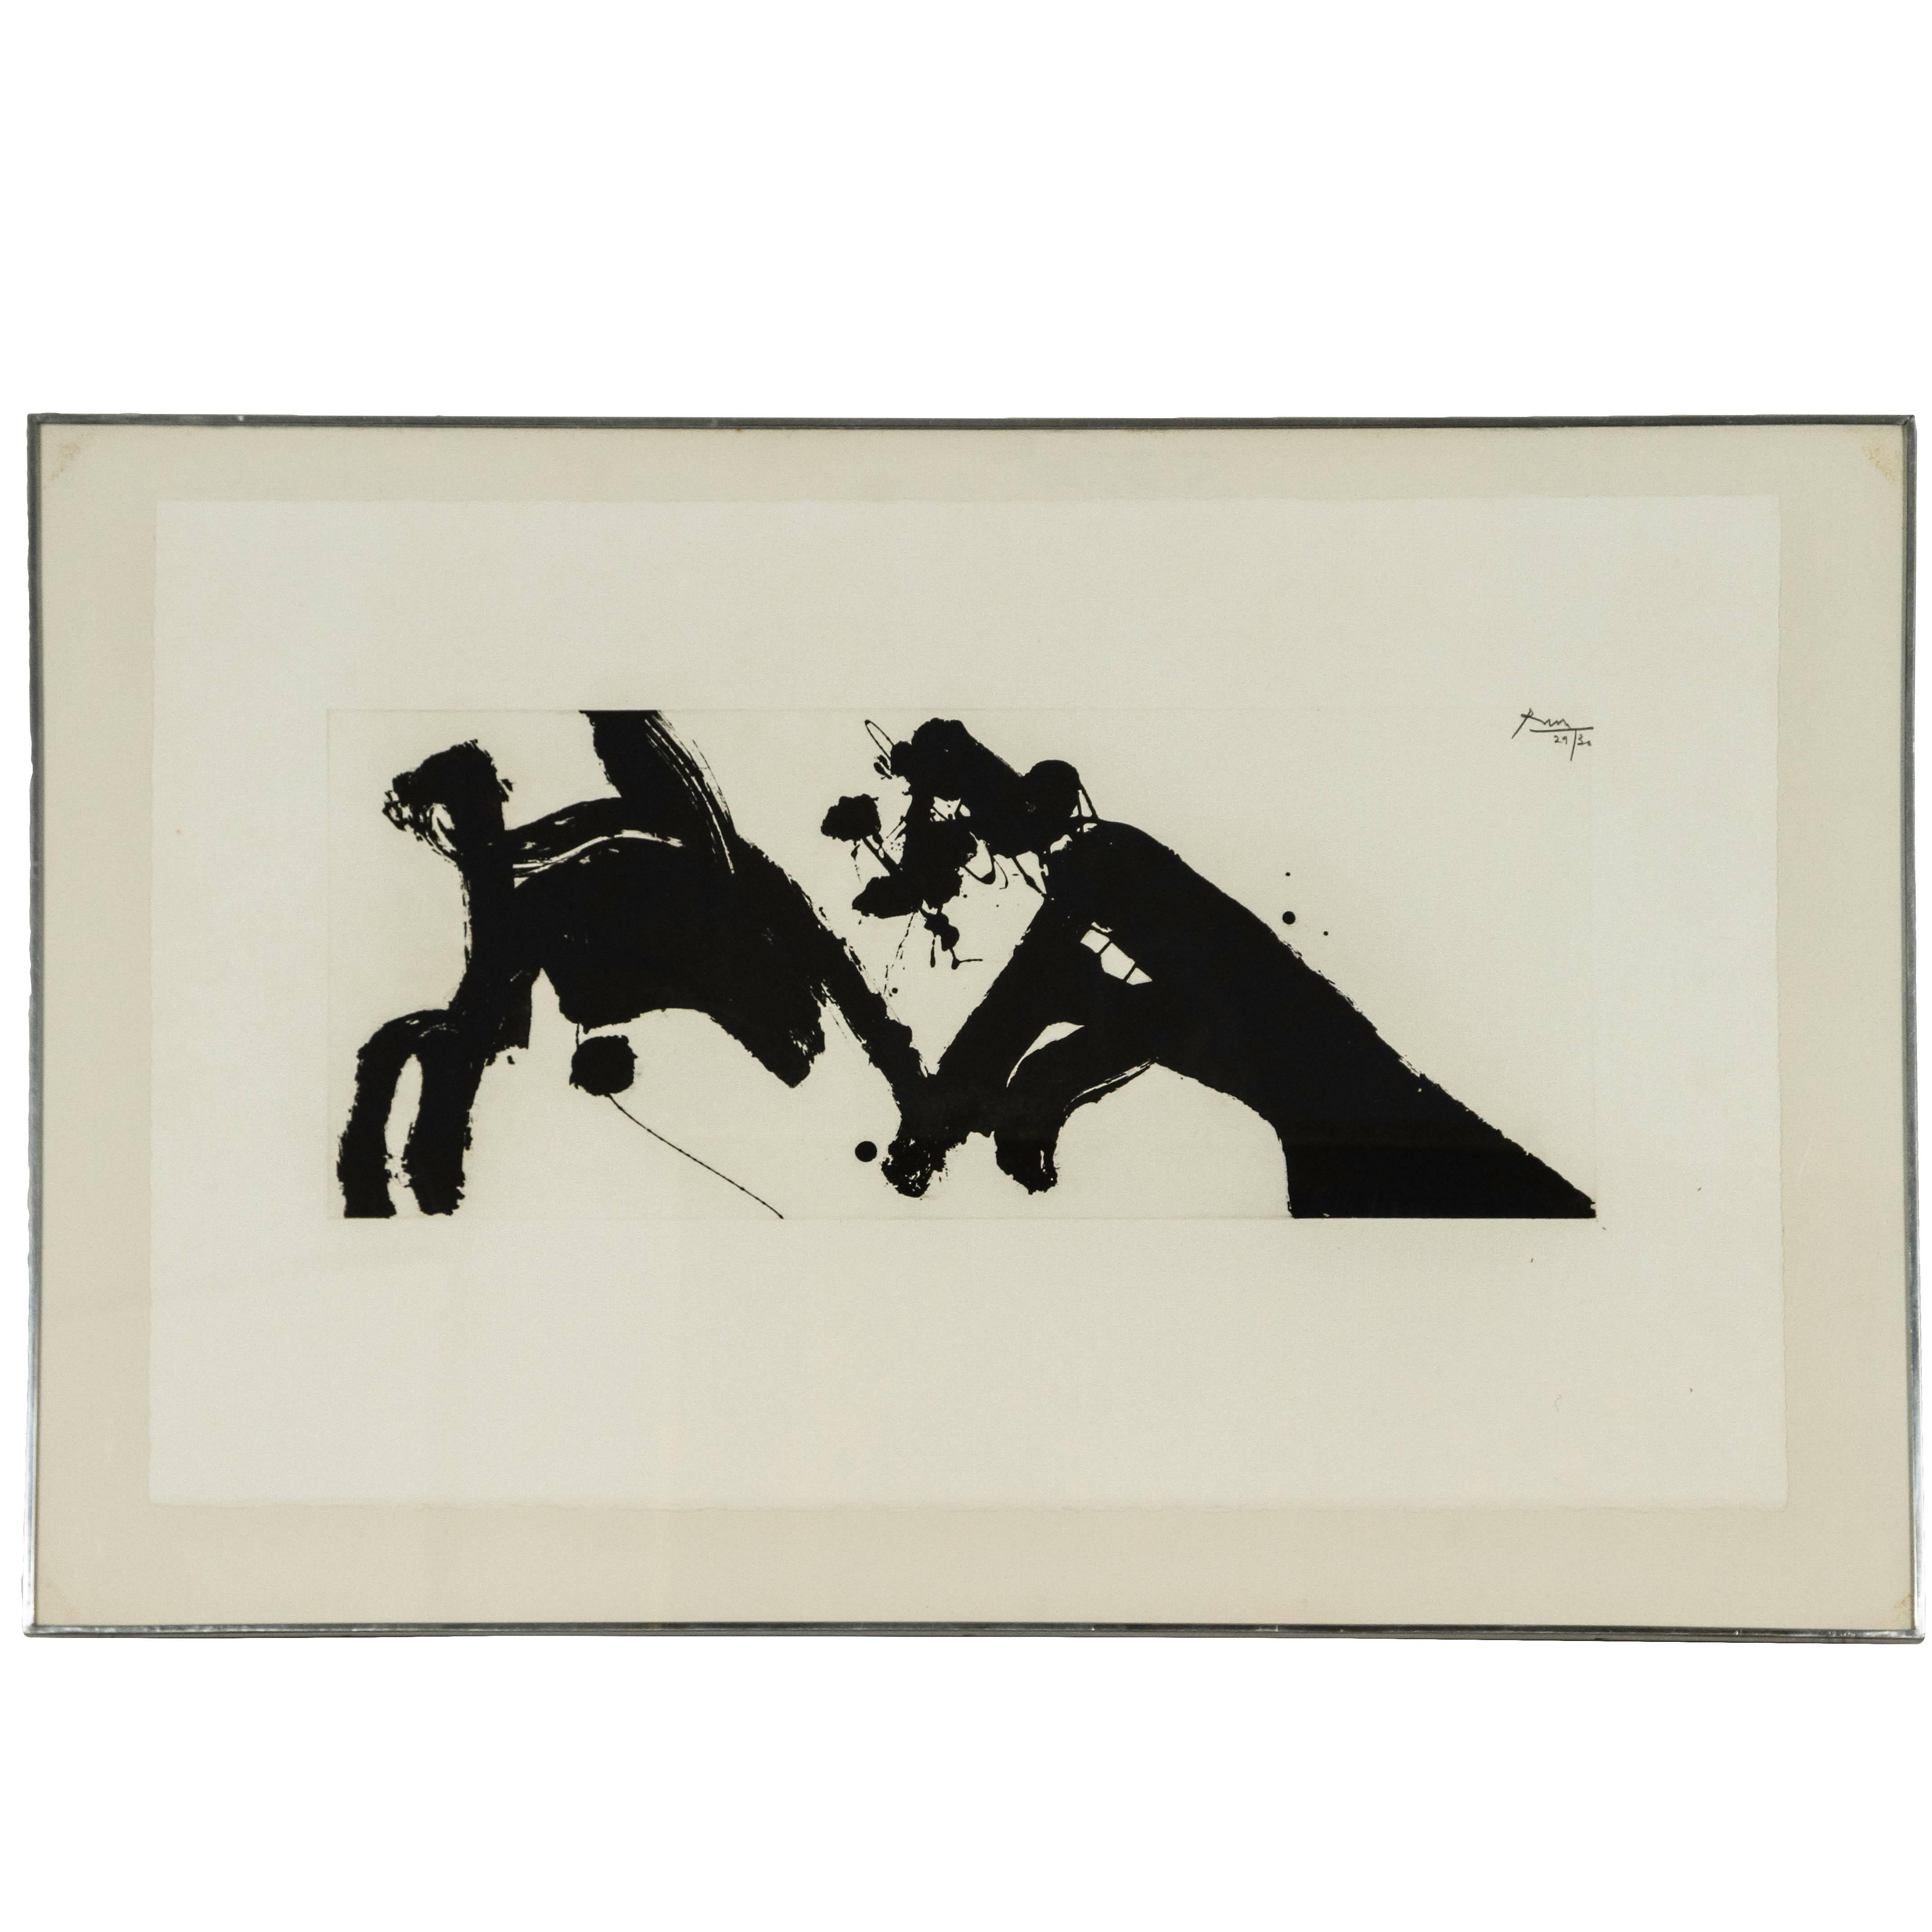 Dance I Etching by Robert Motherwell, 1978